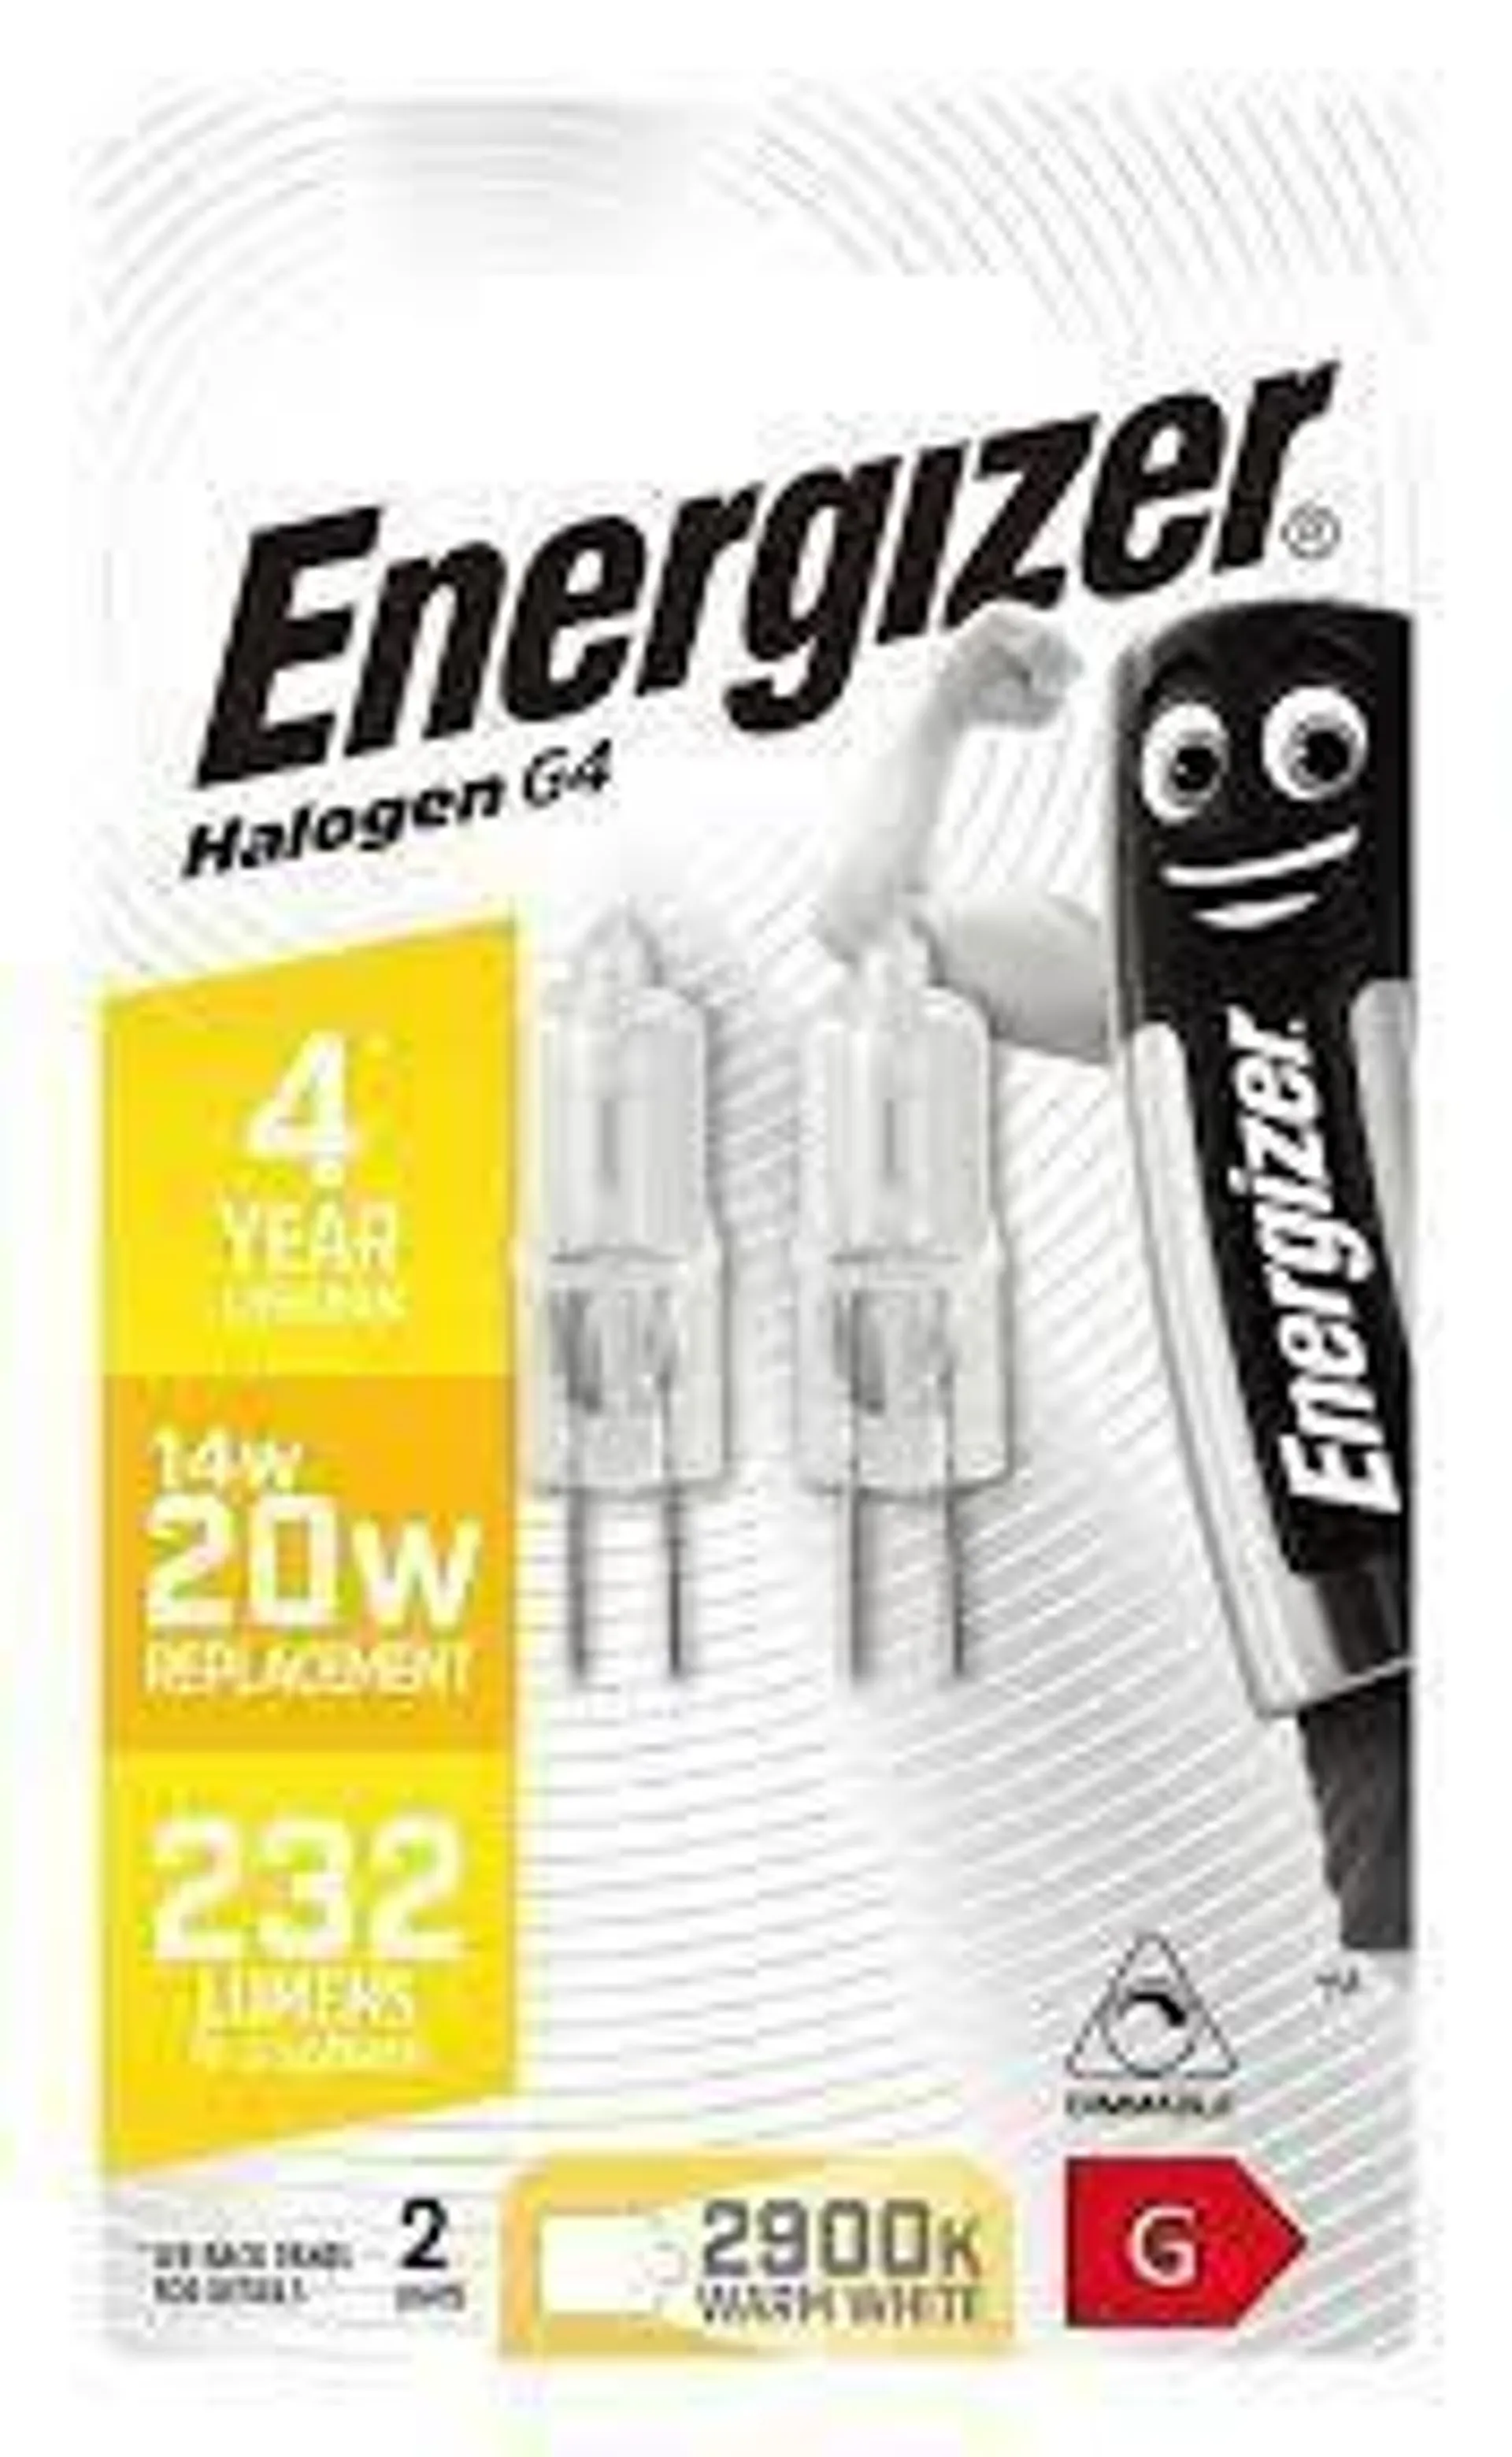 Energizer Halogen G4 14w Dimmable Bulbs